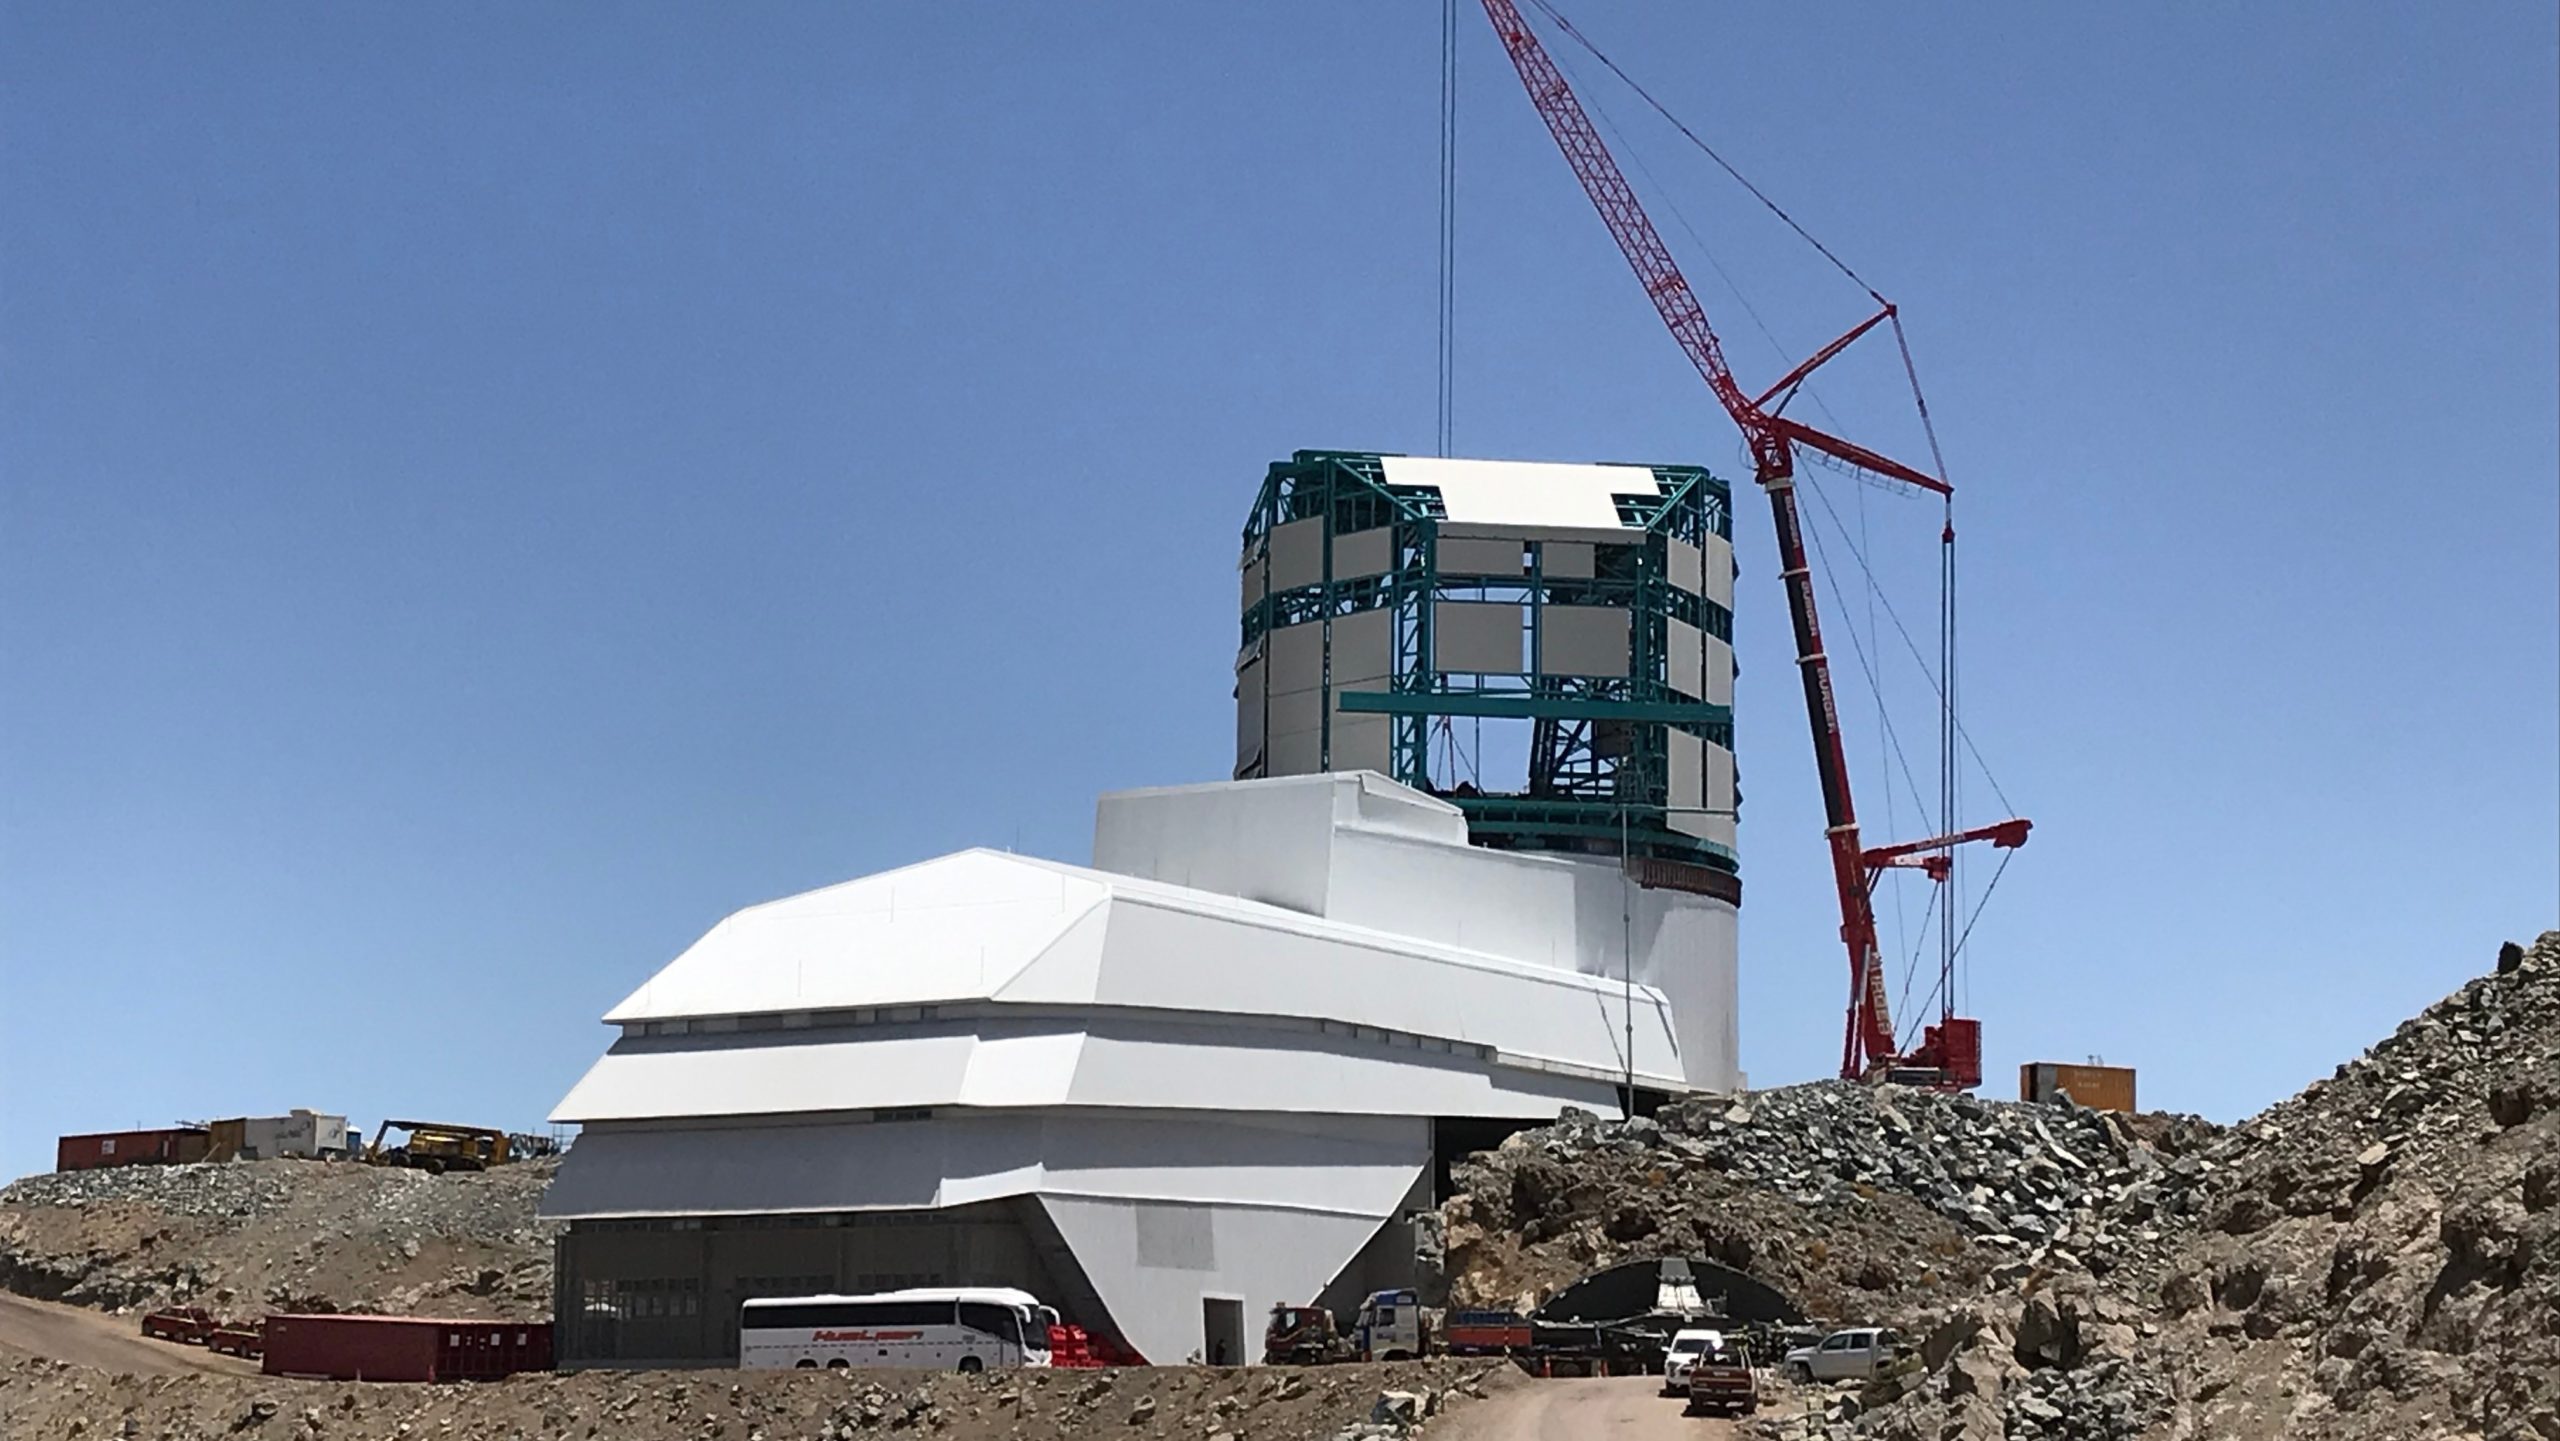 The Rubin Observatory currently under construction in Chile. (Image: Rubin Observatory)